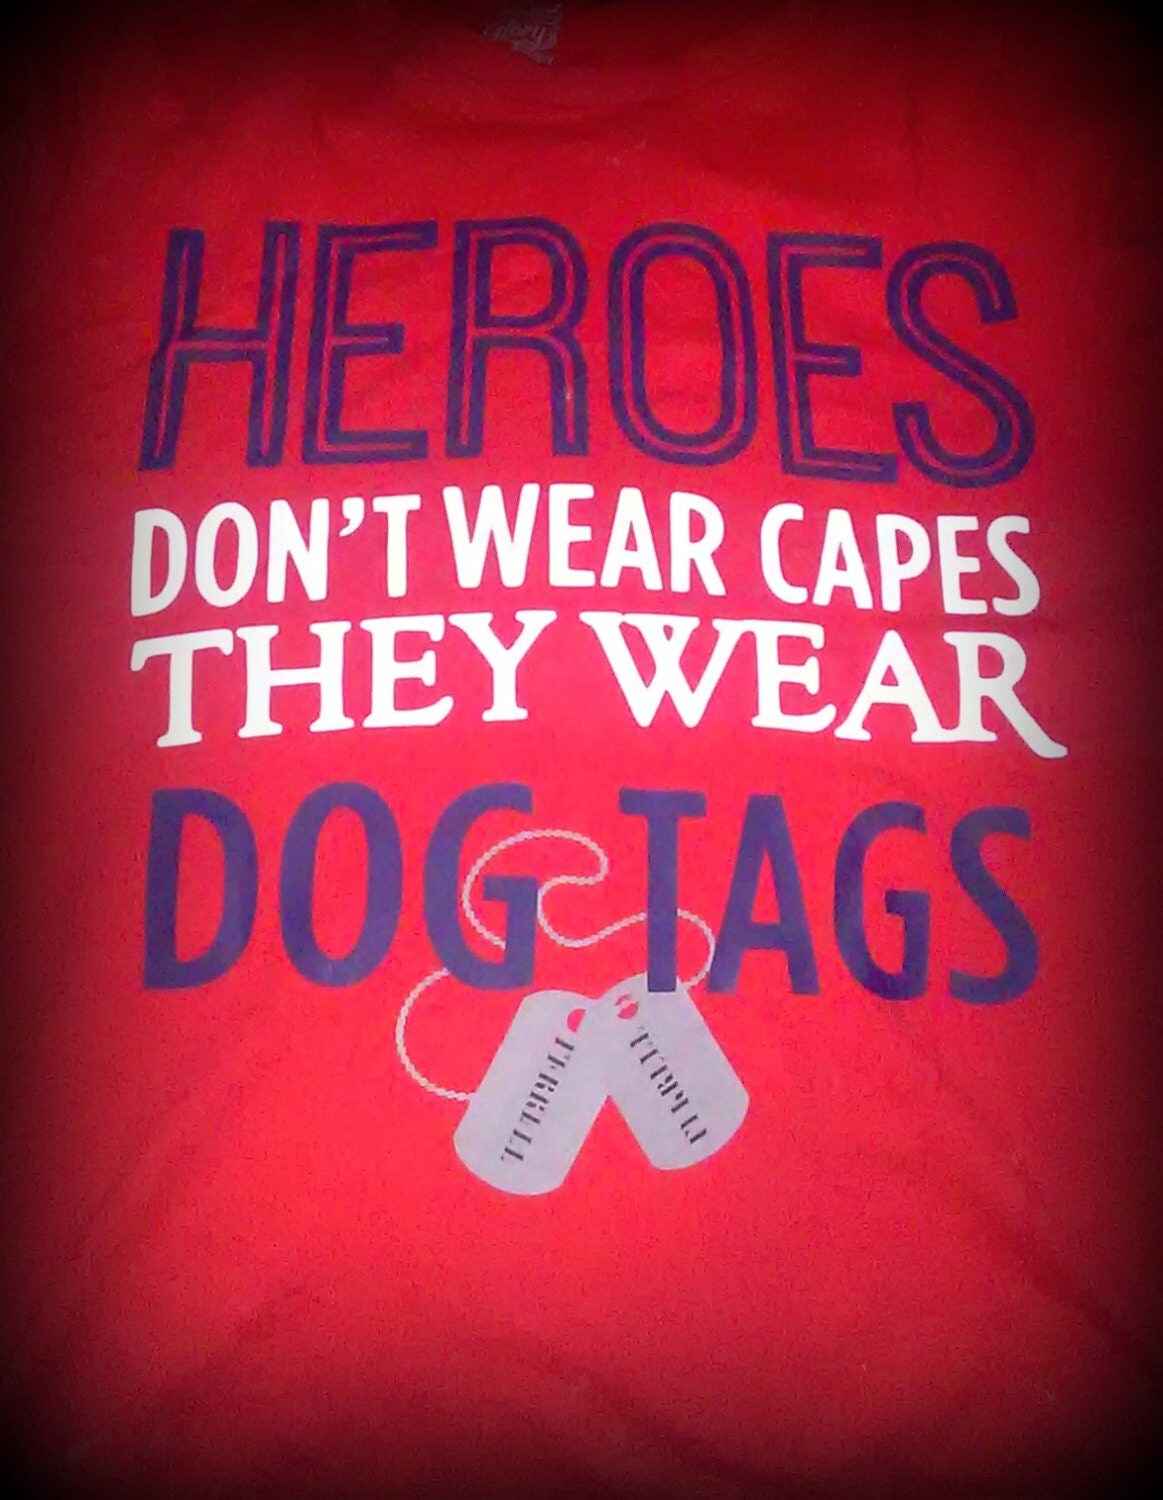 Heroes don't wear capes they wear dog tags shirt.